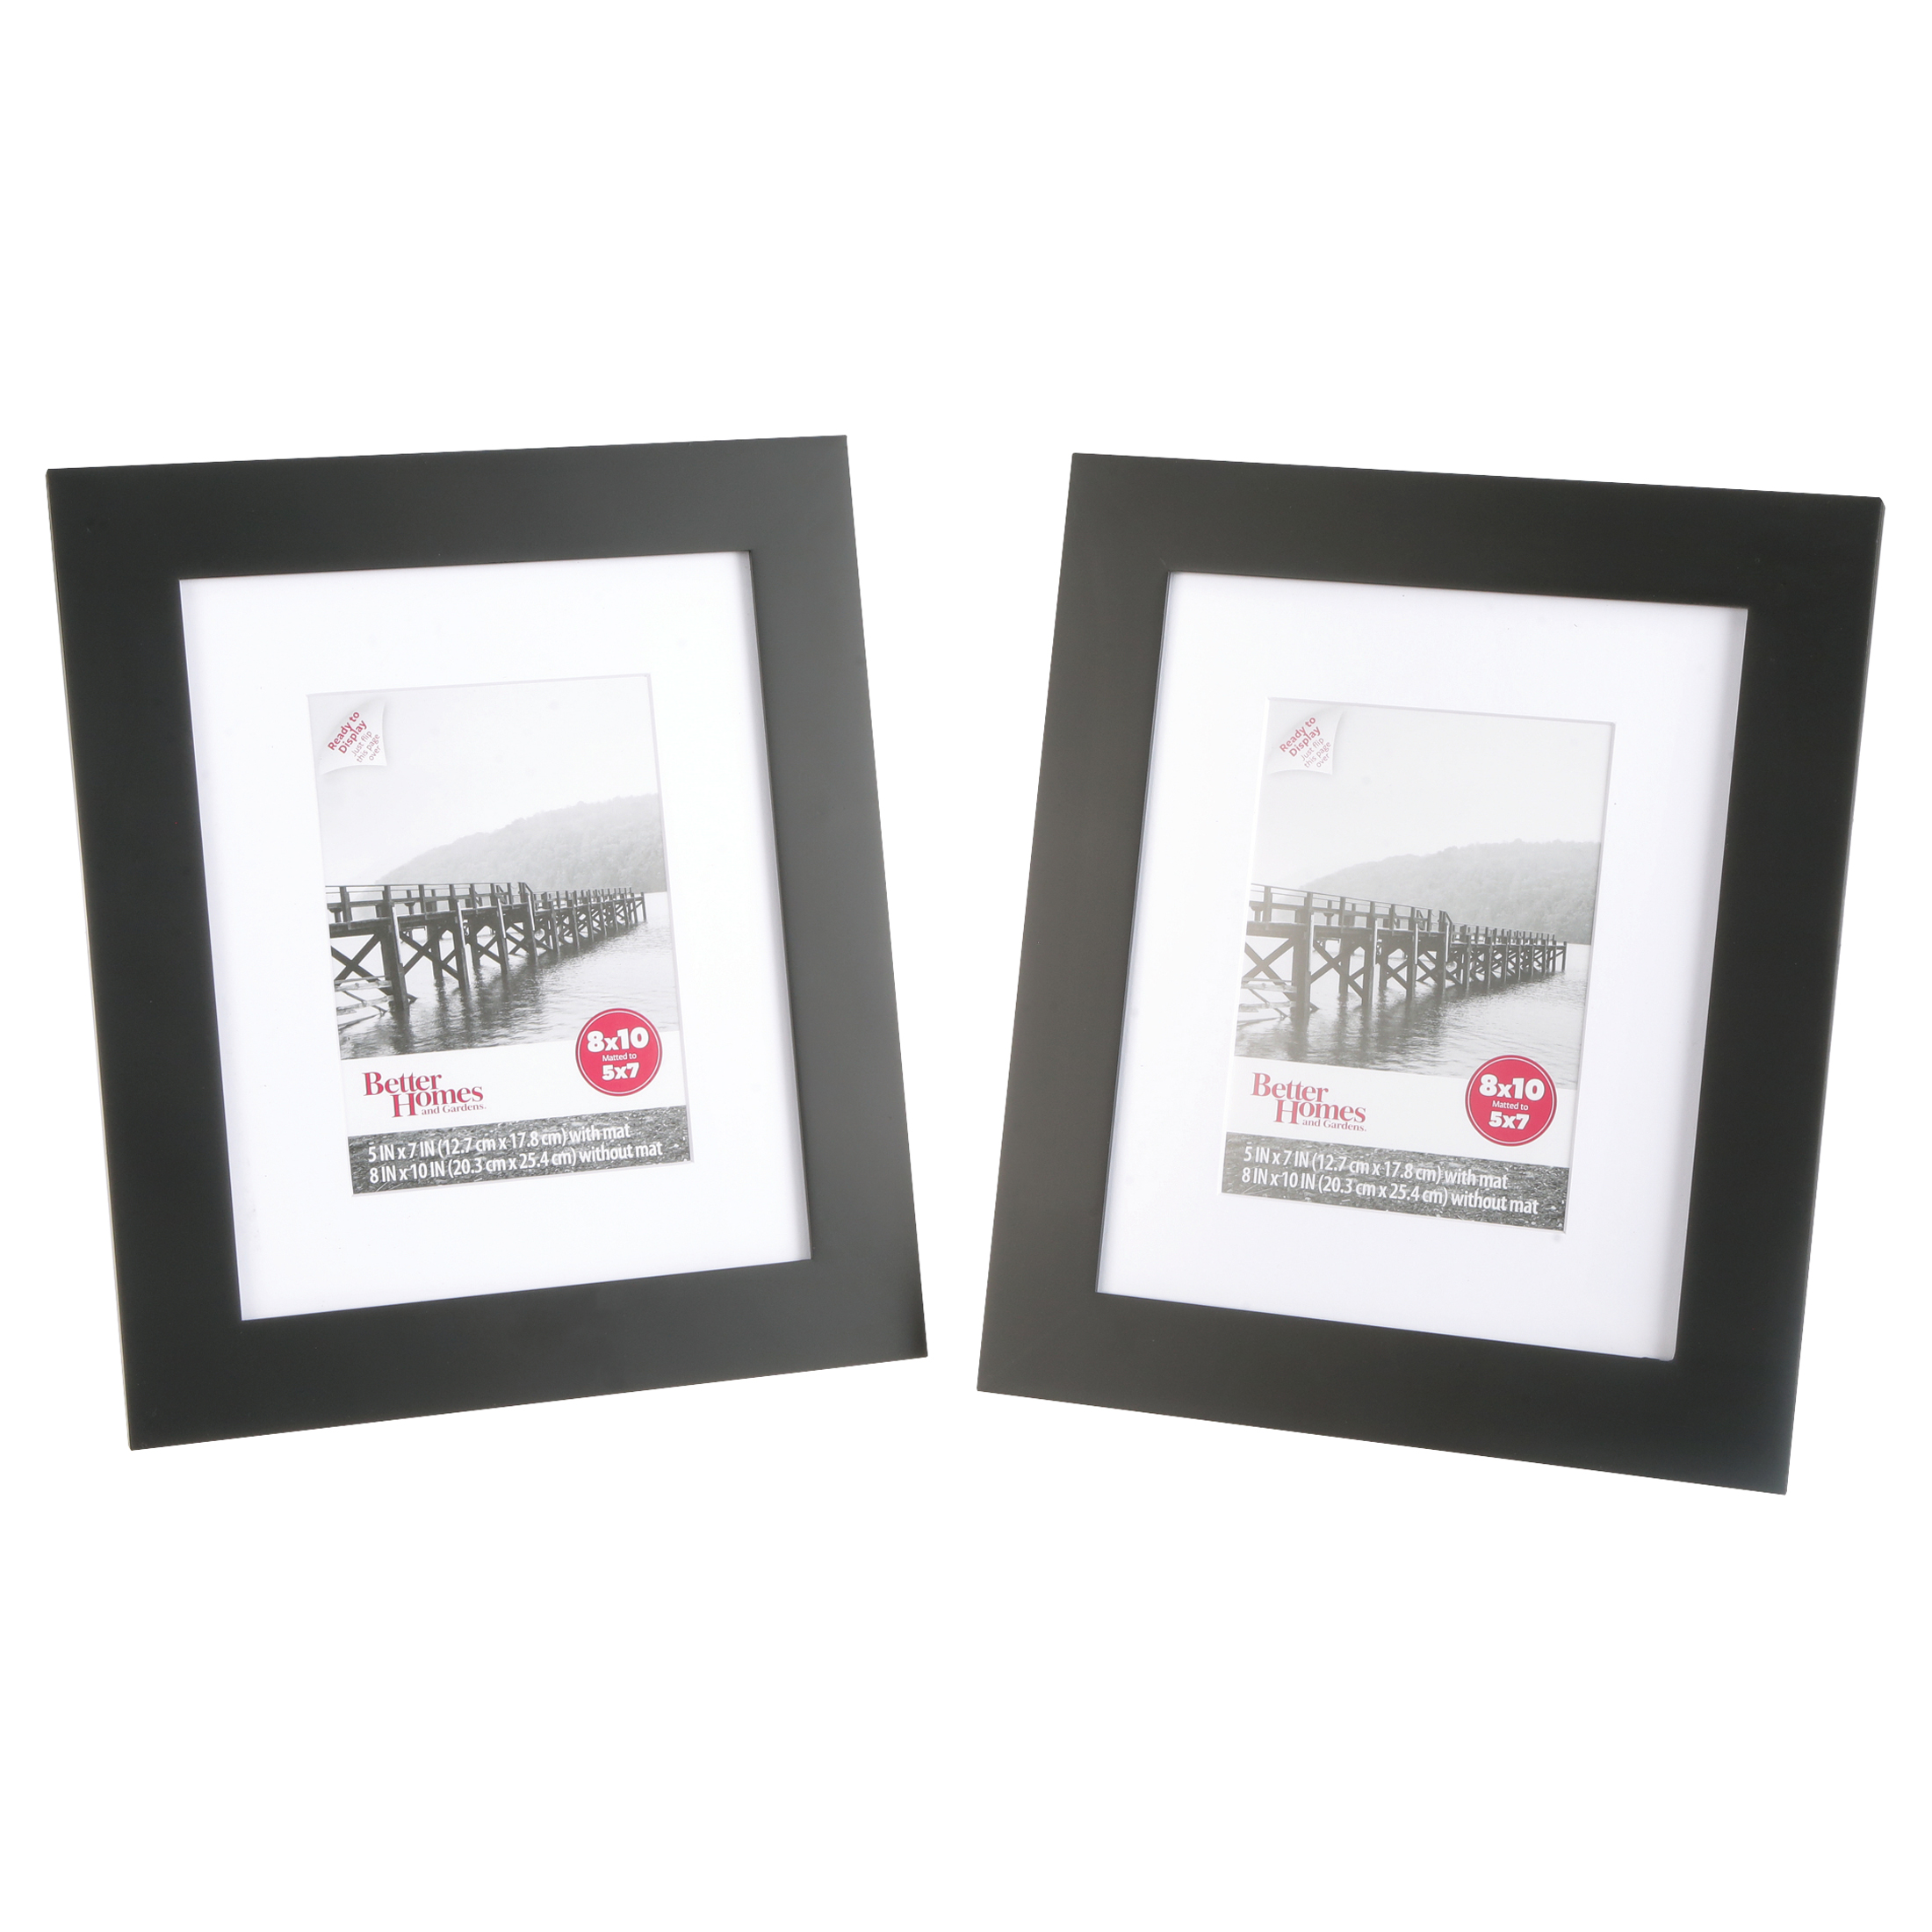 Better Homes & Gardens 8x10 Inch Wide Picture Frame, Black, Set of 2 - image 2 of 7